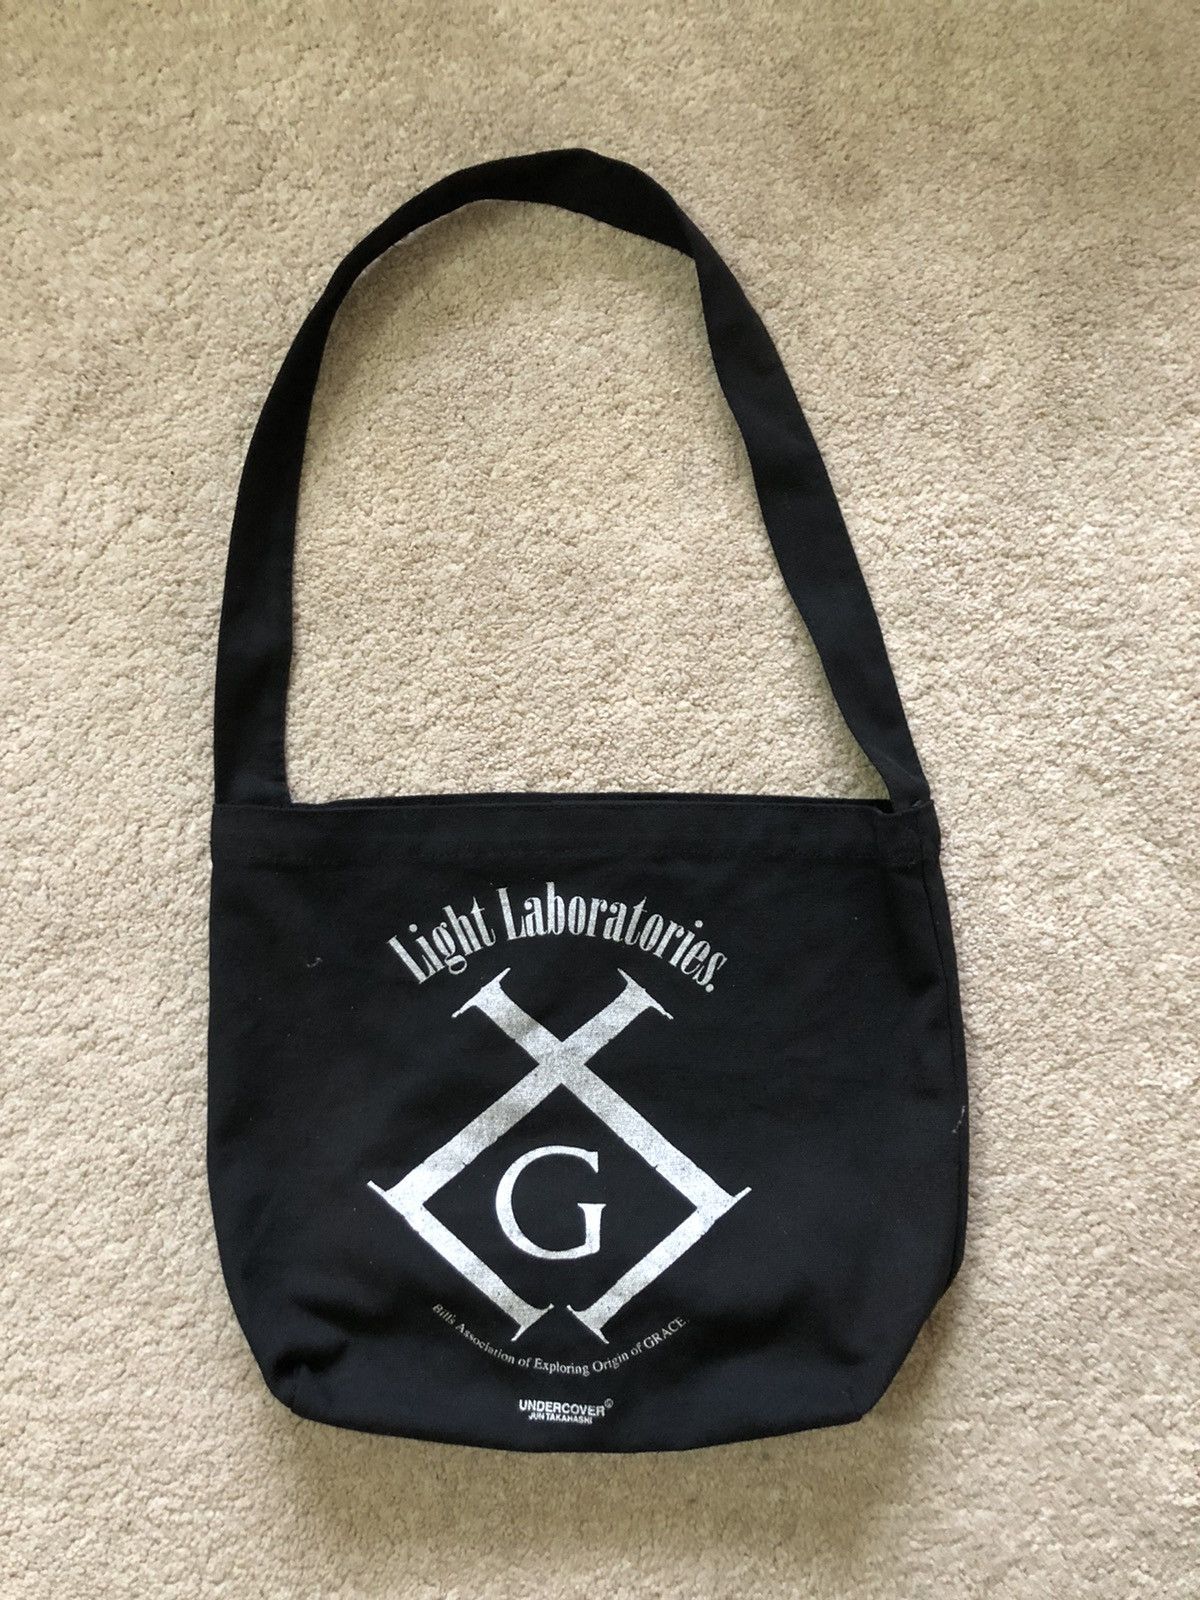 Undercover Middle Finger Embroidered Tote Bag | Grailed